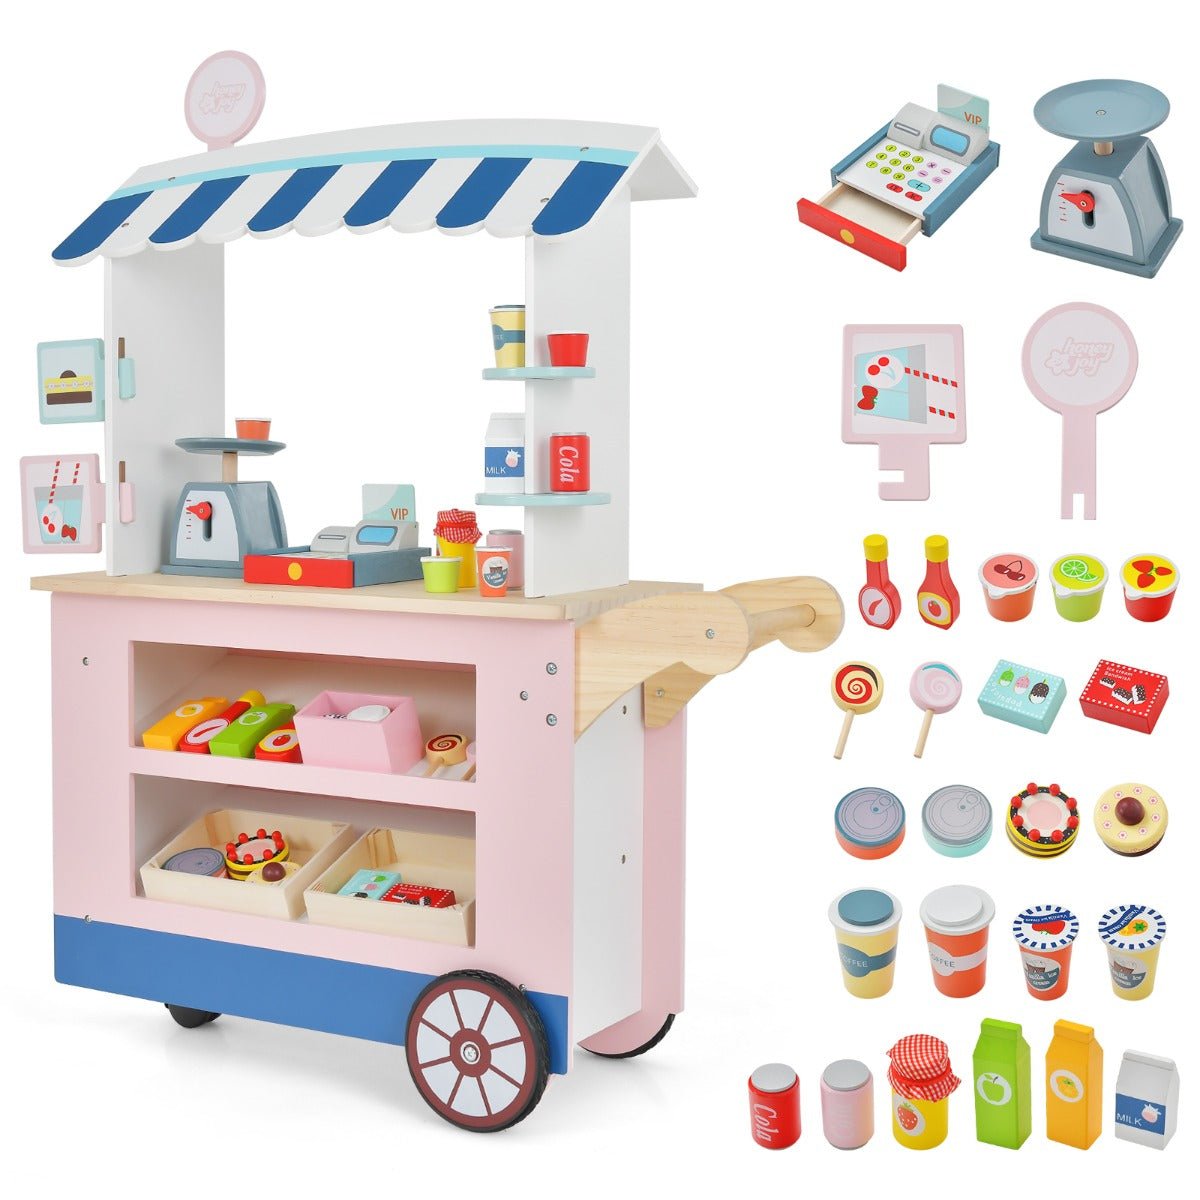 Shop and Play Toy Cart: Where Kids Learn and Have Fun!